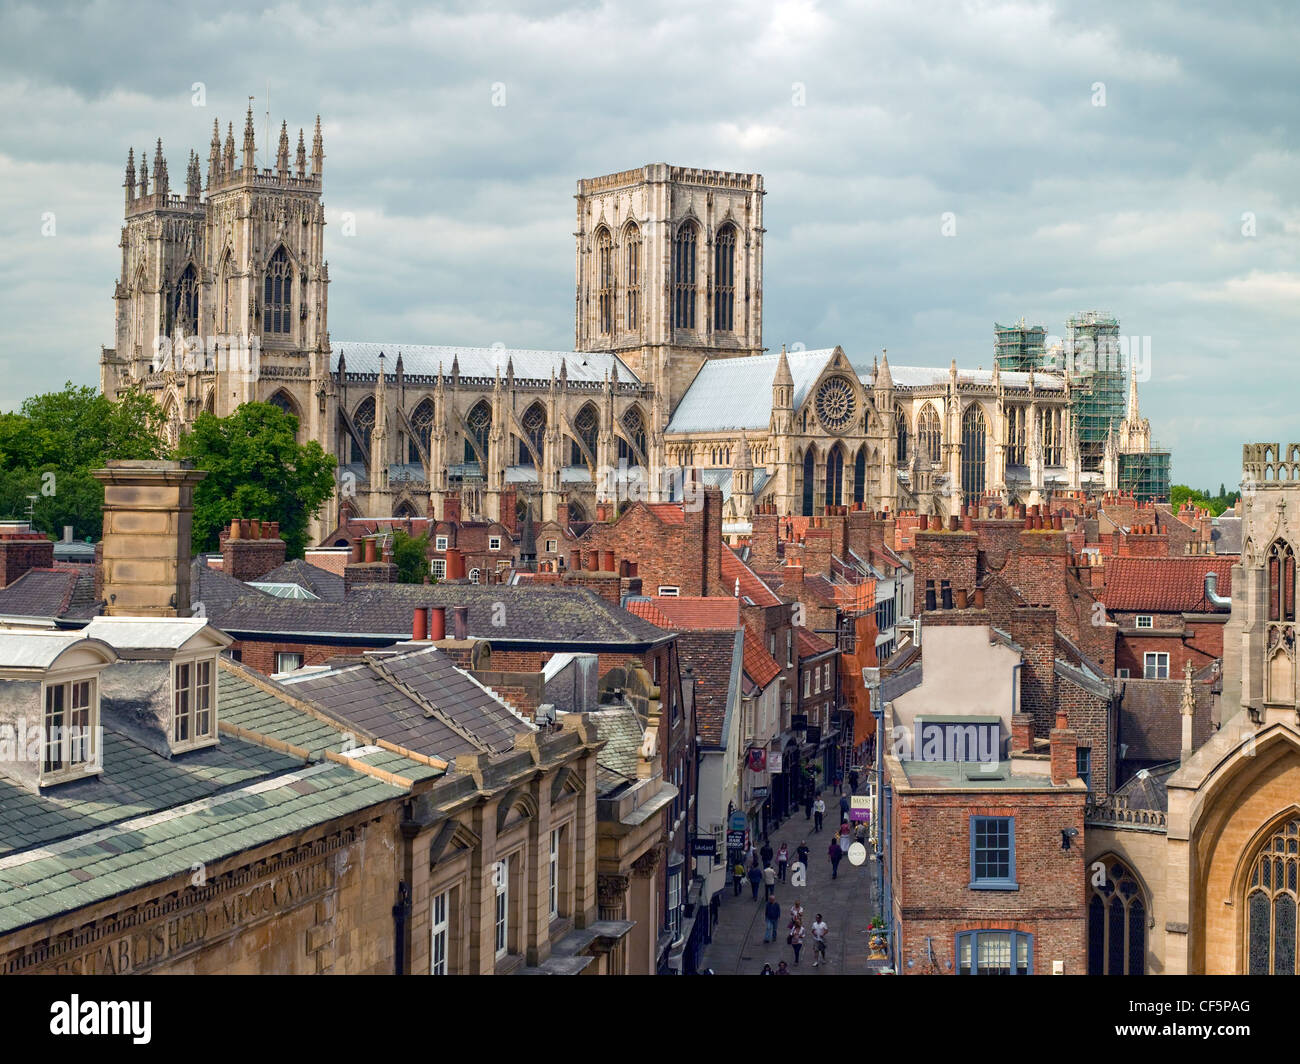 People shopping in Stonegate leading up to York Minster. Stock Photo